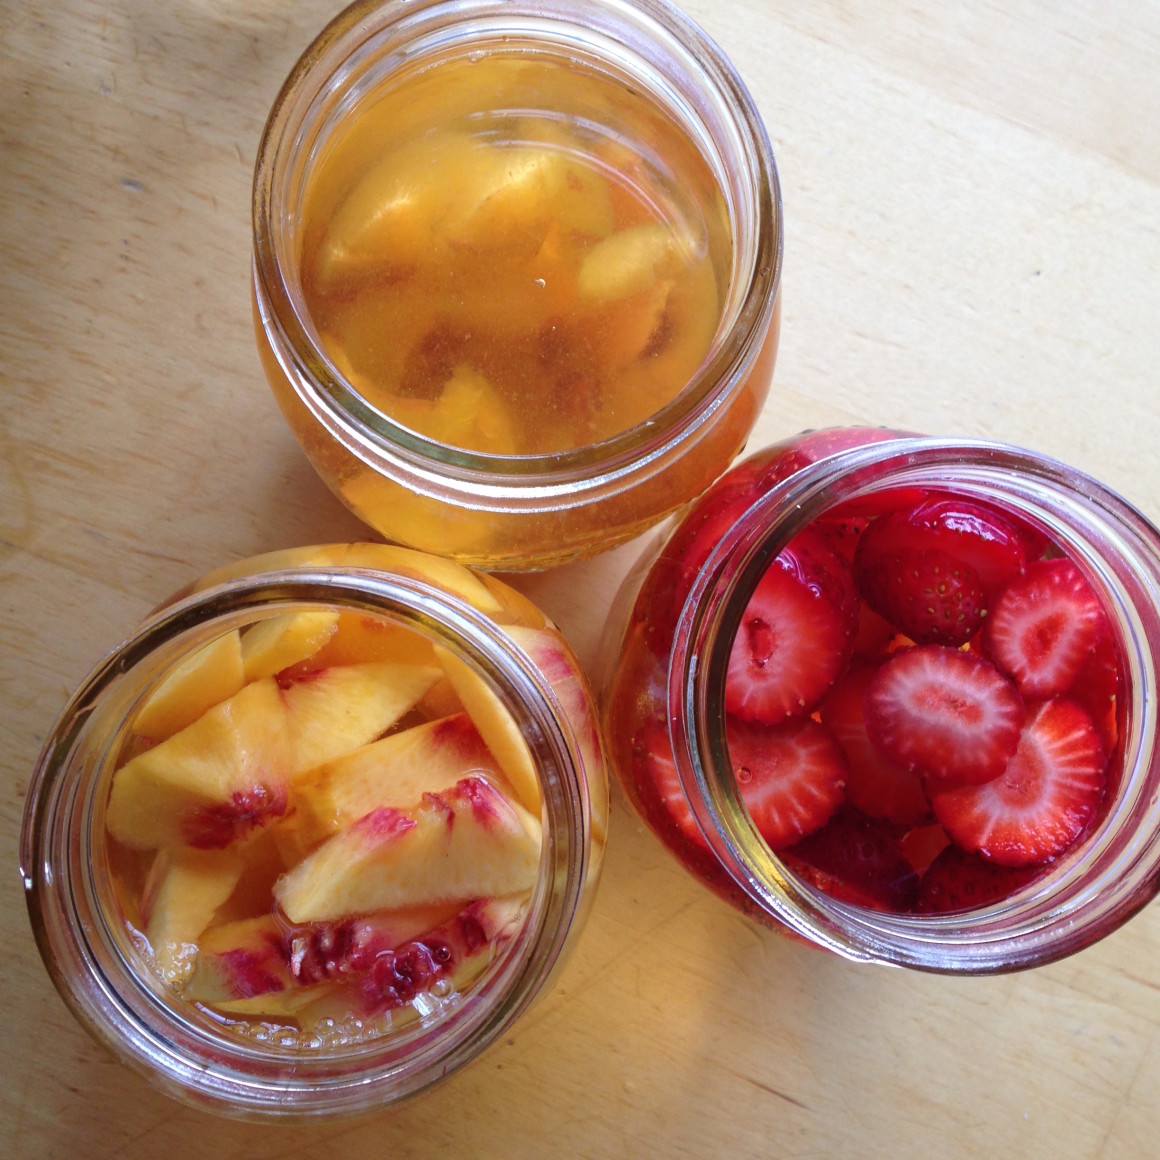 Hello Creative Family Shares how to make fruit infused vinegar using berries or soft fleshed fruit. Perfect for foodie Christmas gifts. She uses Strawberry Vinegar, Peach Vinegar & Plum Vinegar as examples. I want to try cherry!